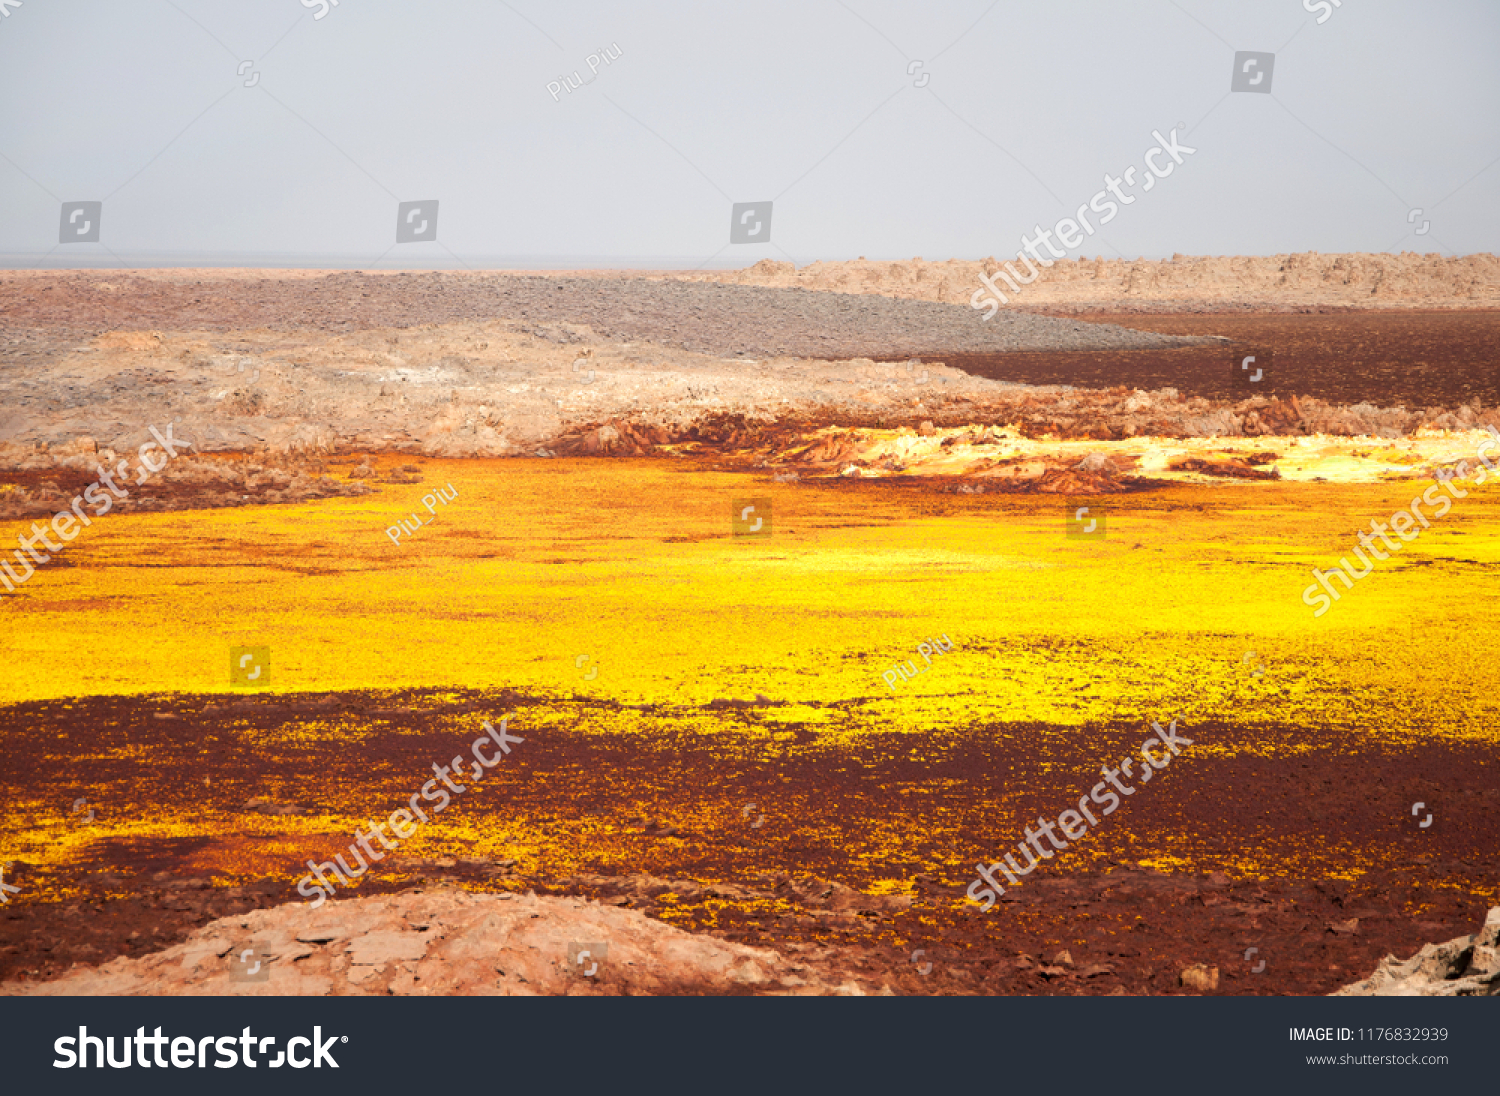 Valley with sulfur minerals formations of geothermal area in crater of Dallol Volcano, Danakil Depression, Northern Ethiopia #1176832939